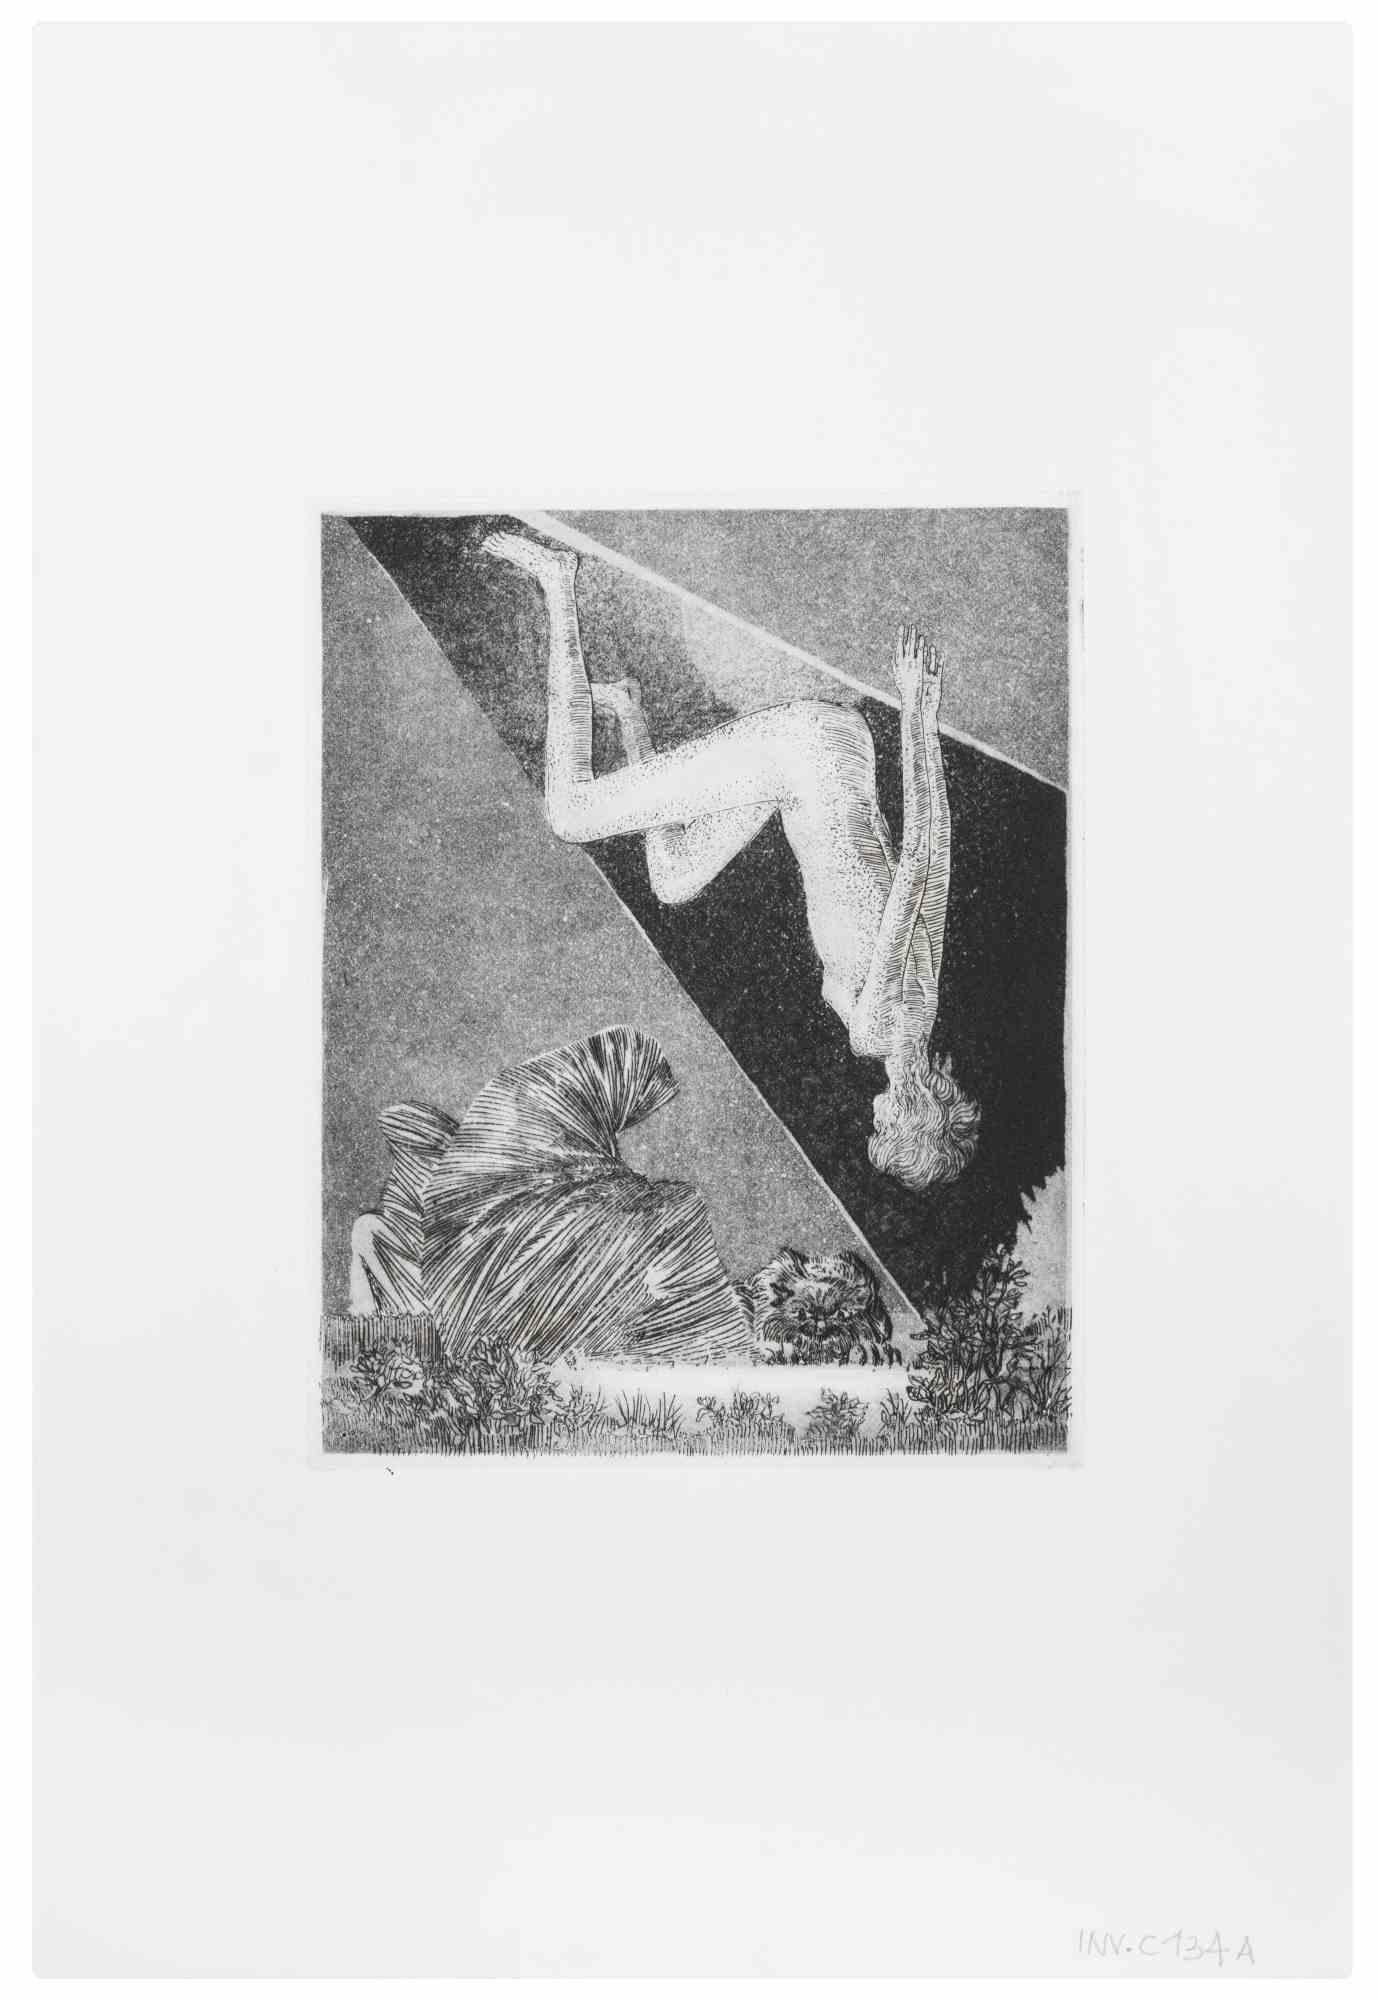 The Vision is an artwork realized by the Contemporary Italian artist  Leo Guida (1992 - 2017) in the 1970s.

Original black and white etching on paper.

Good conditions.

Leo Guida  (1992 - 2017). Sensitive to current issues, artistic movements and